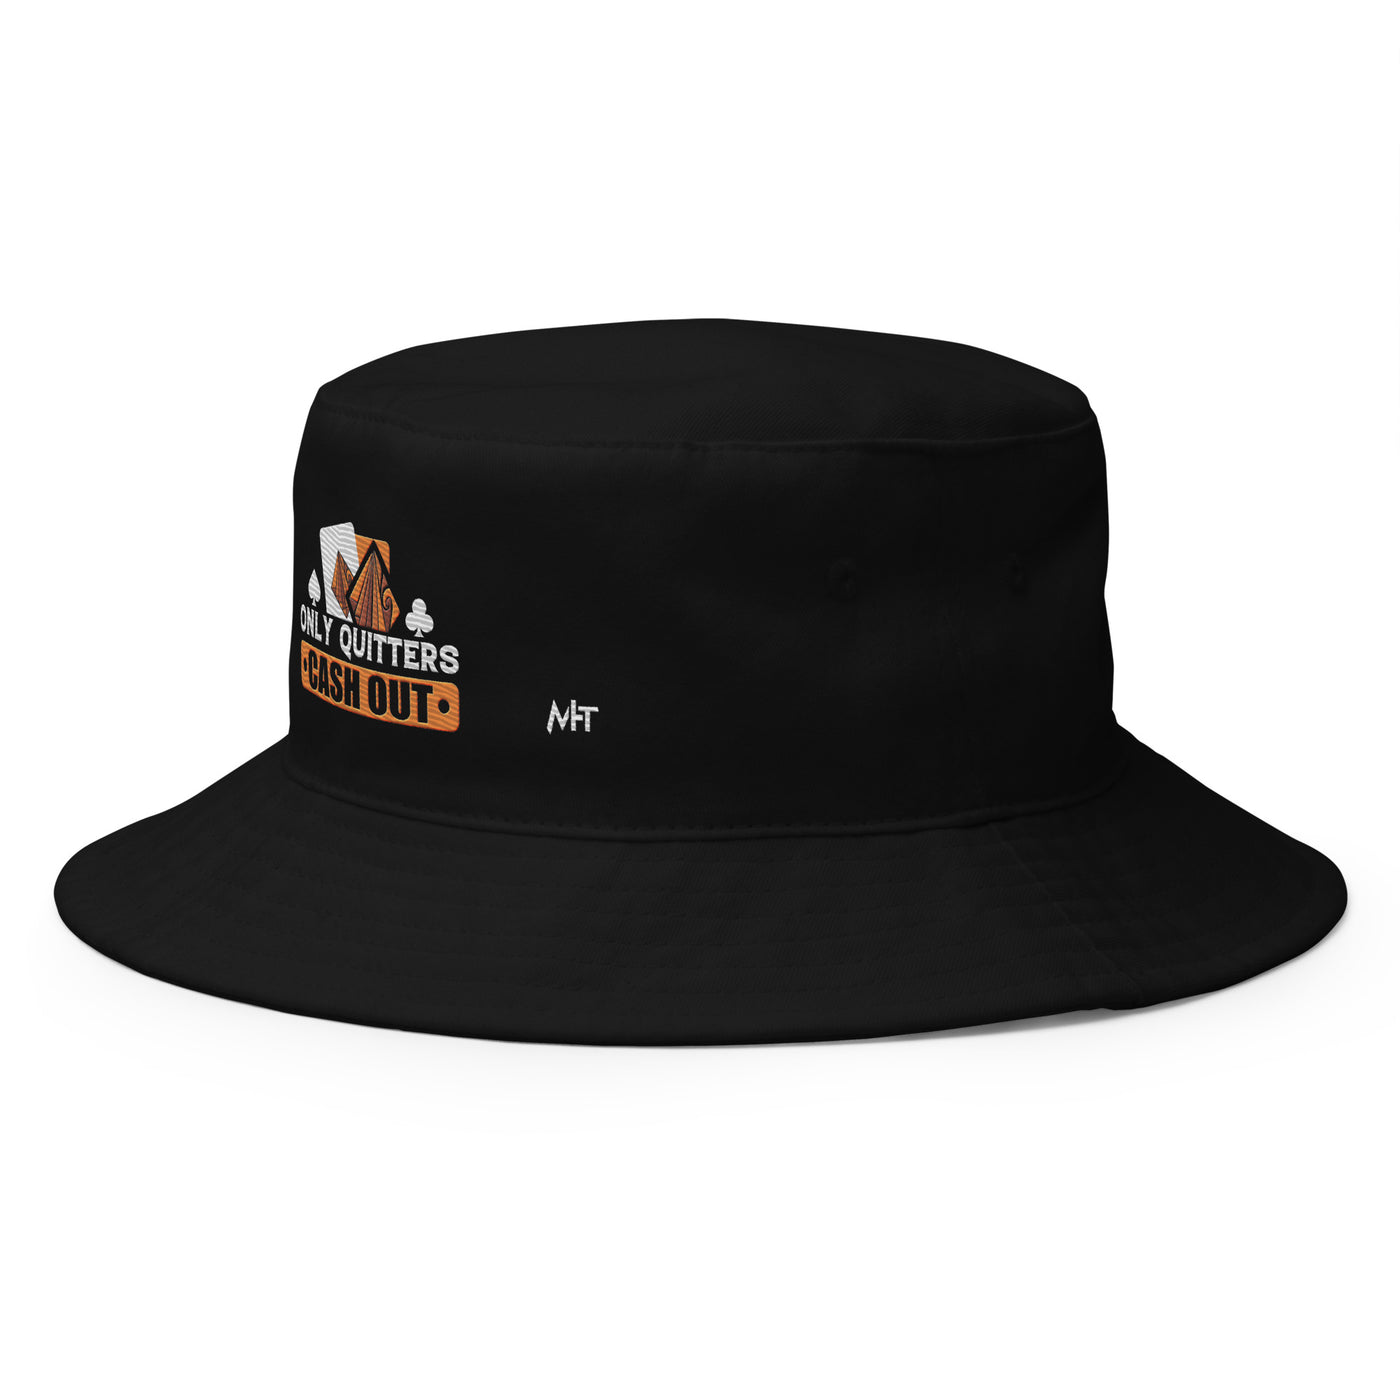 Only Quitters Cash Out - Bucket Hat